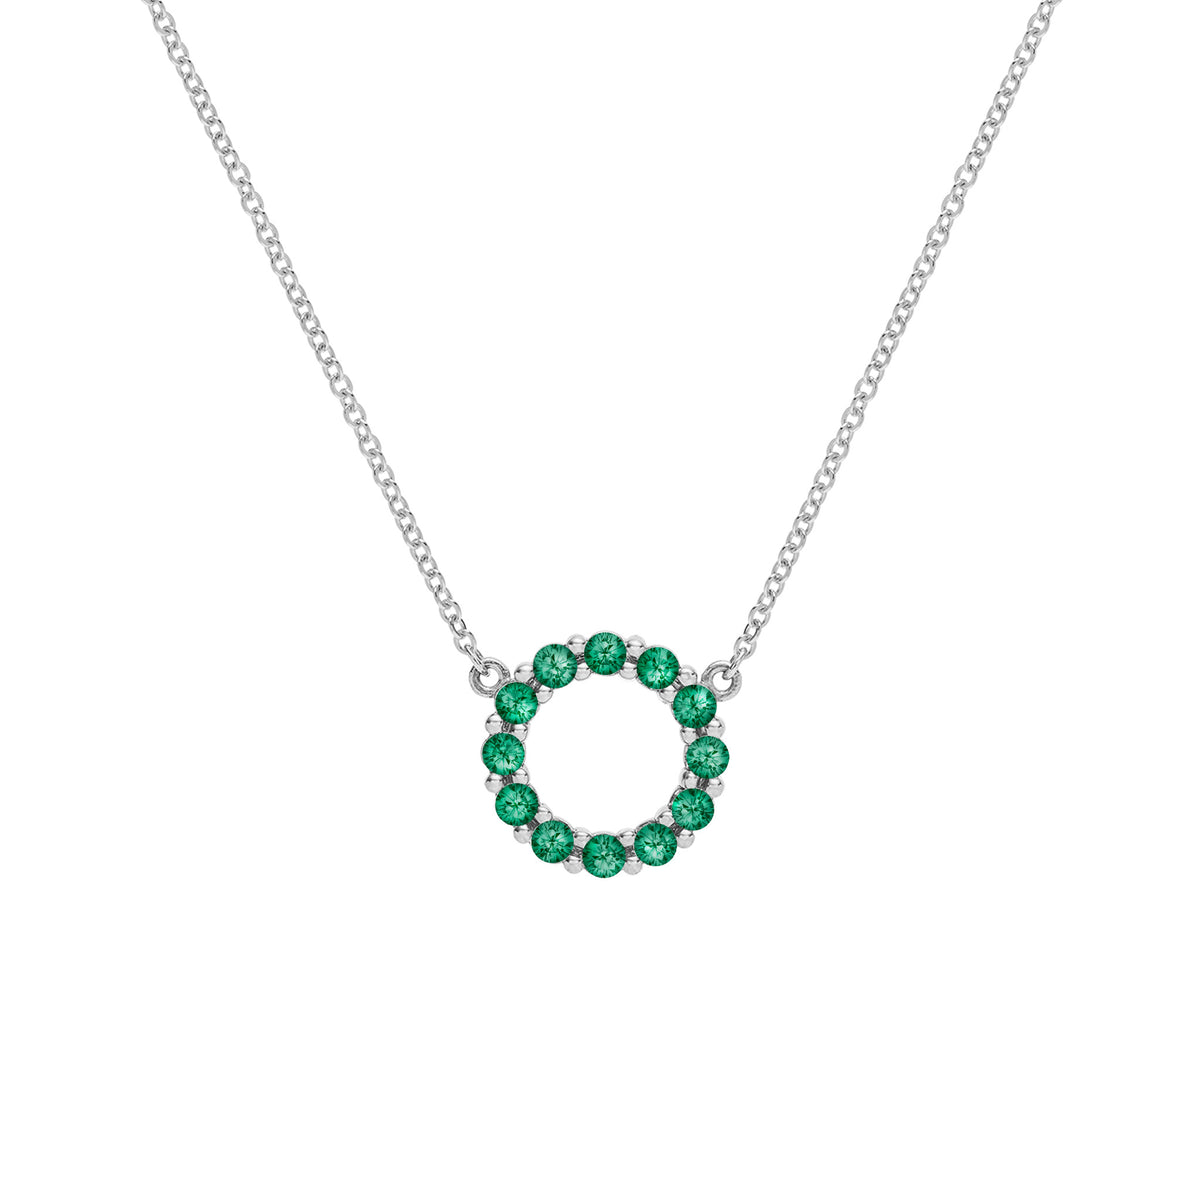 Brooke Gregson | Small Emerald 18k Gold Necklace at Voiage Jewelry